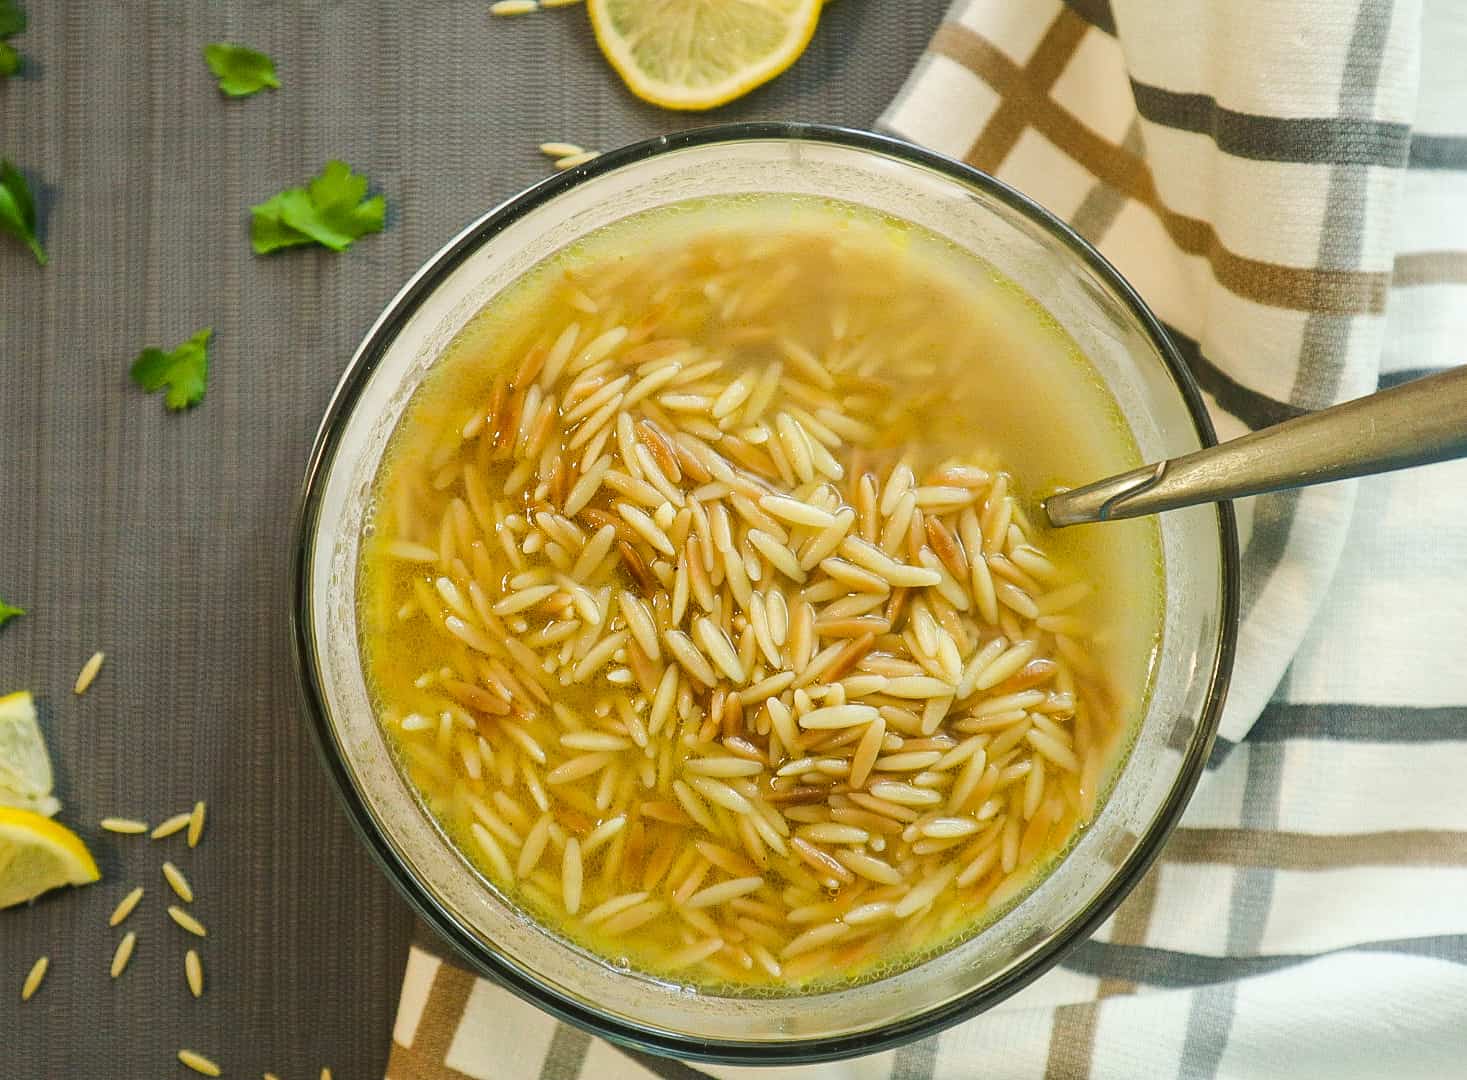 A bowl of orzo soup with slice of lemon on the side.